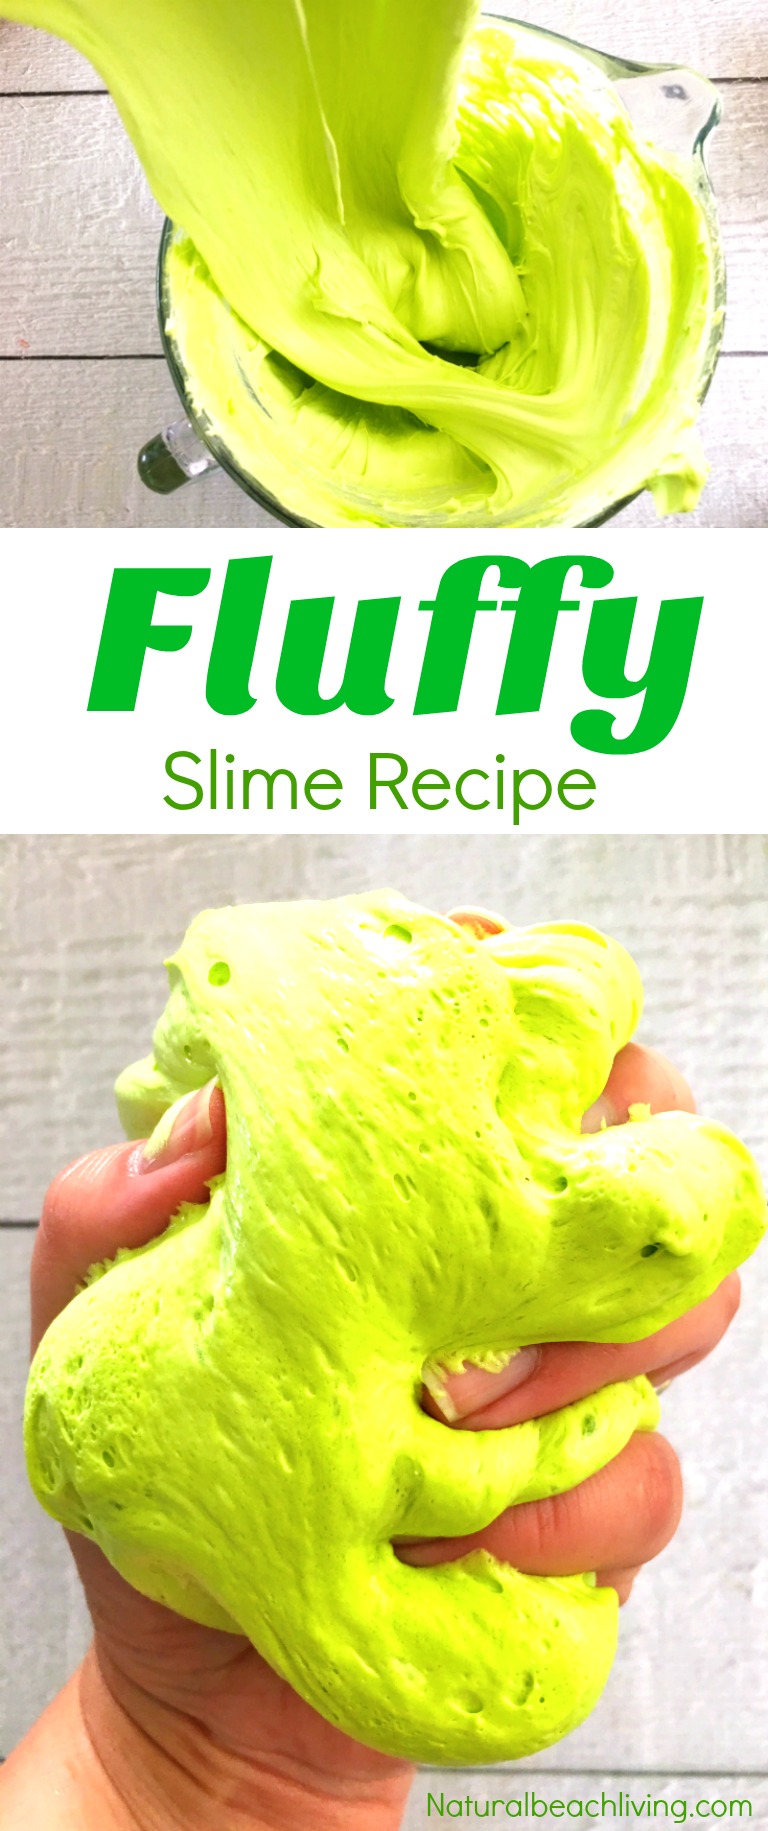 25+ Halloween Slime Ideas Kids Will Love, Halloween Slime Recipes that are Super Cool and Perfect for a Halloween Party. Jiggly Slime and Glow in the Dark Slime, Slime Recipe with Contact Solution plus awesome Fluffy Slime Recipe 